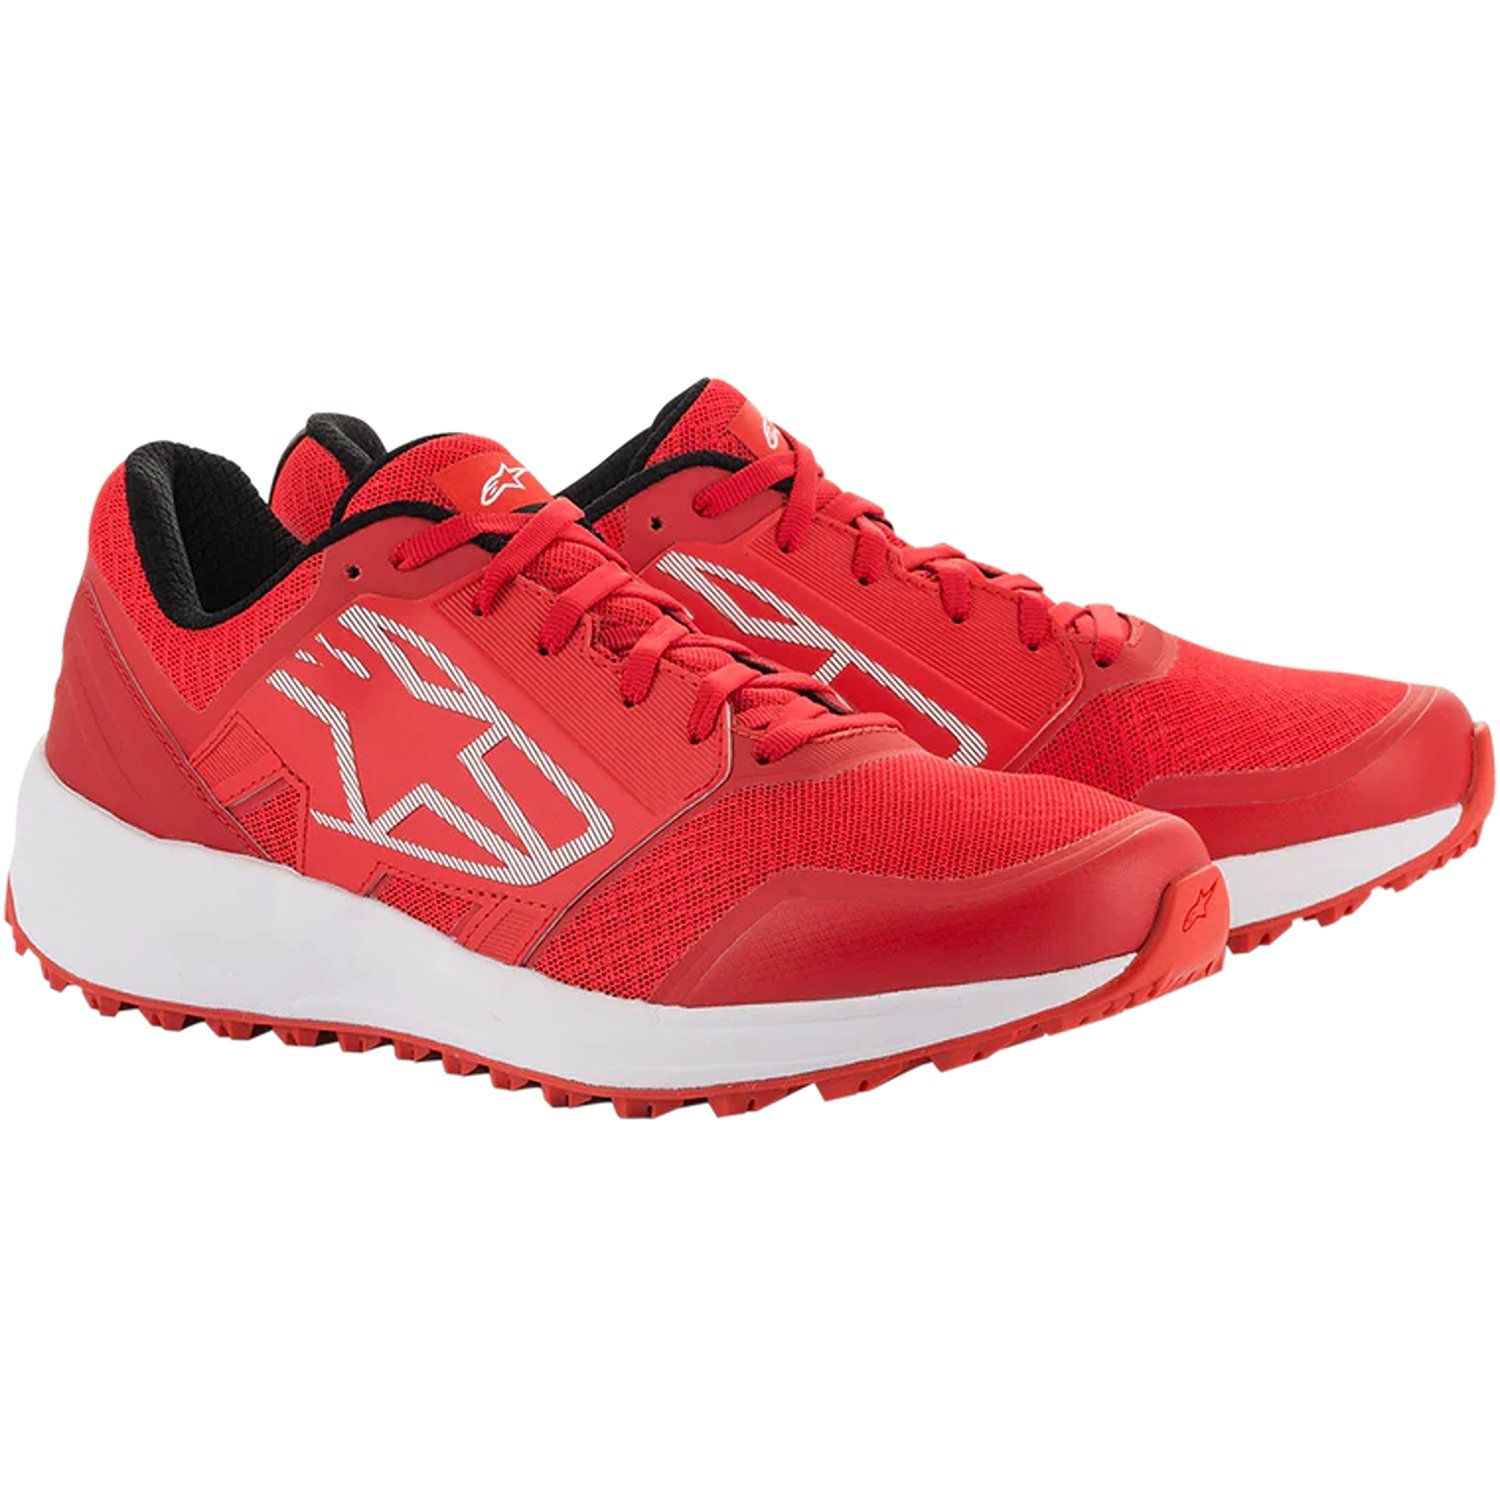 Image of Alpinestars Meta Trail Shoes Red White Size US 13 ID 8059175092183